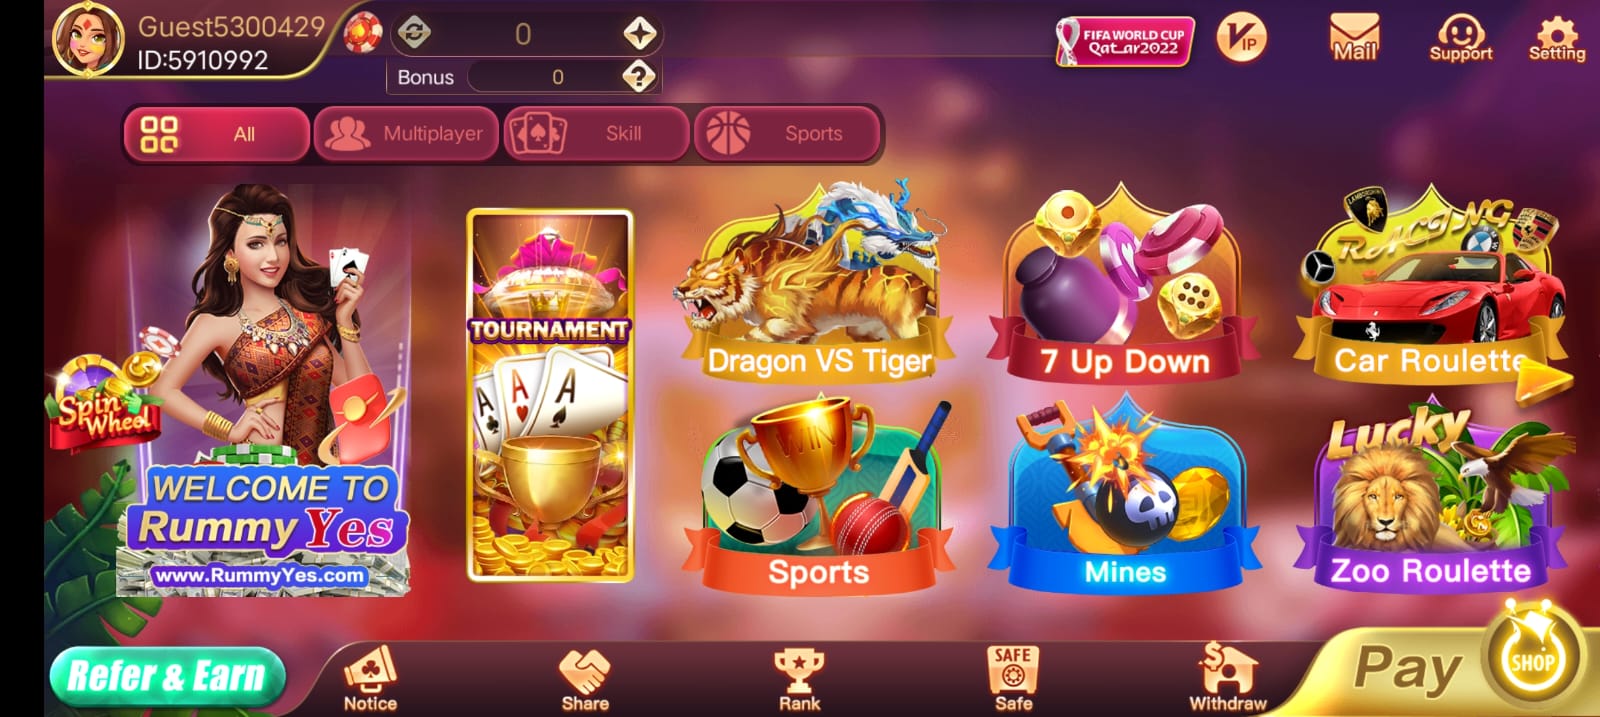 Available Games on Rummy Yes Apk